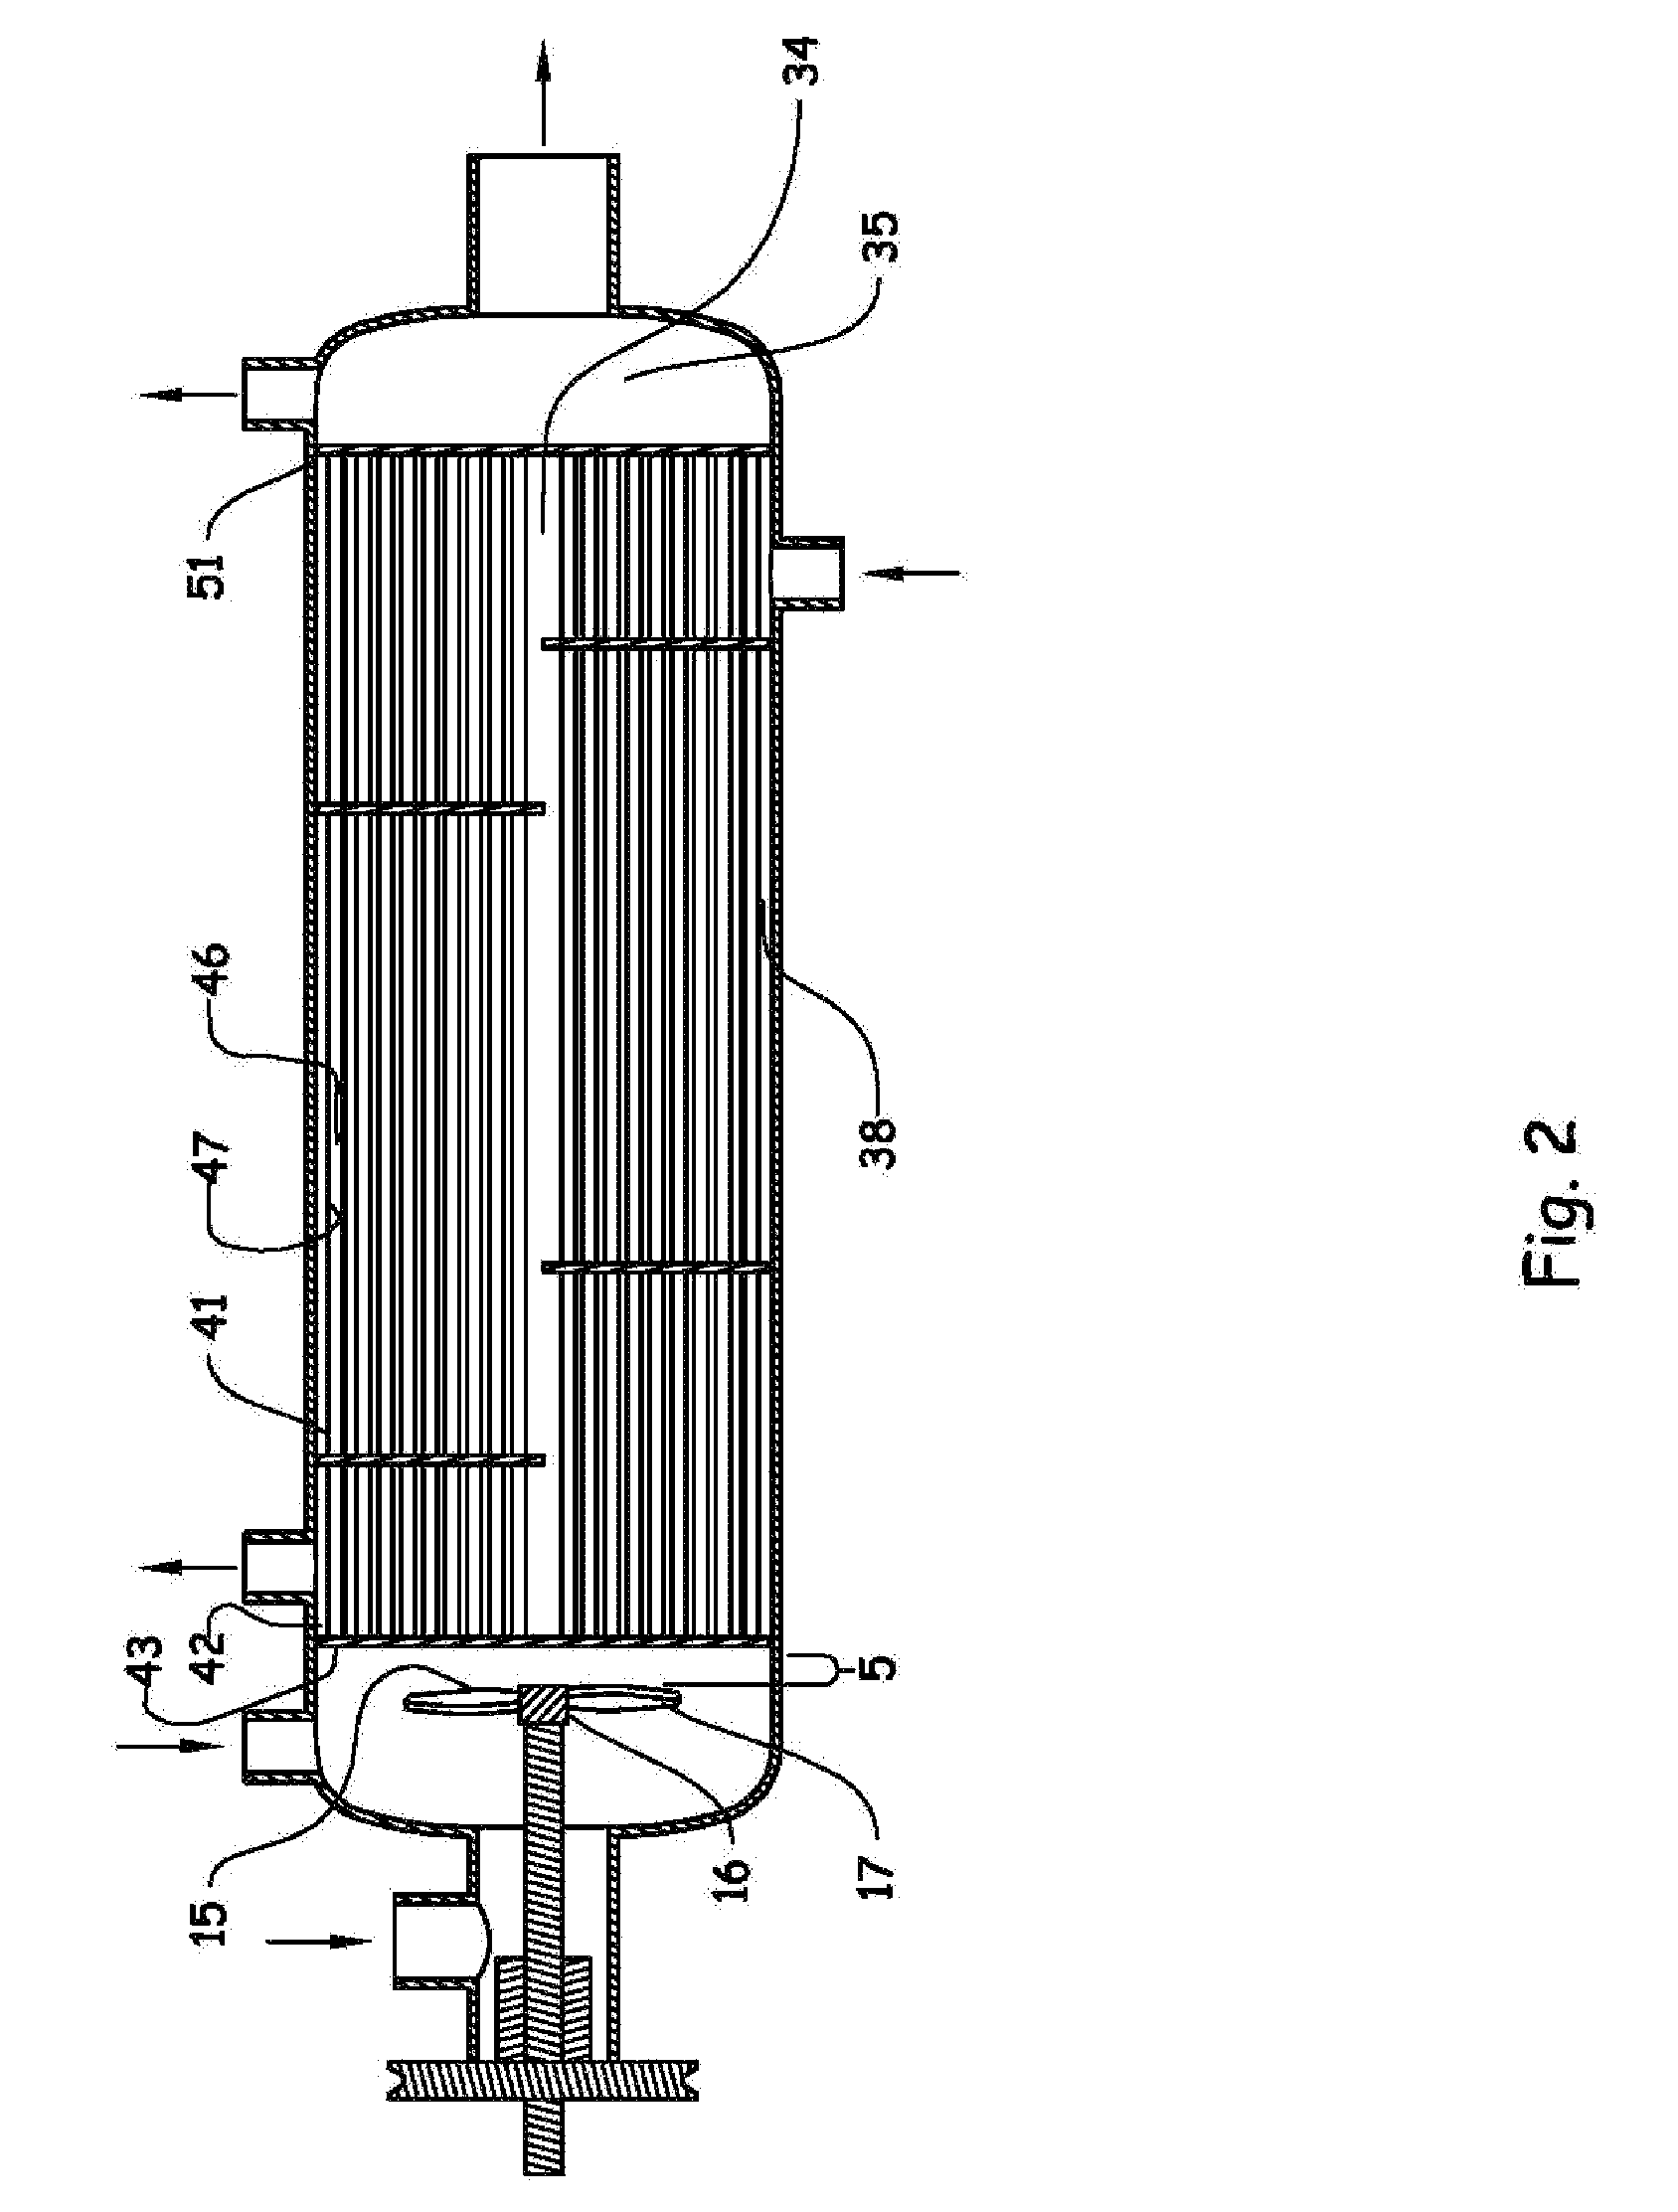 Tube-side sequentially pulsable-flow shell-and-tube heat exchanger appratus, system, and method